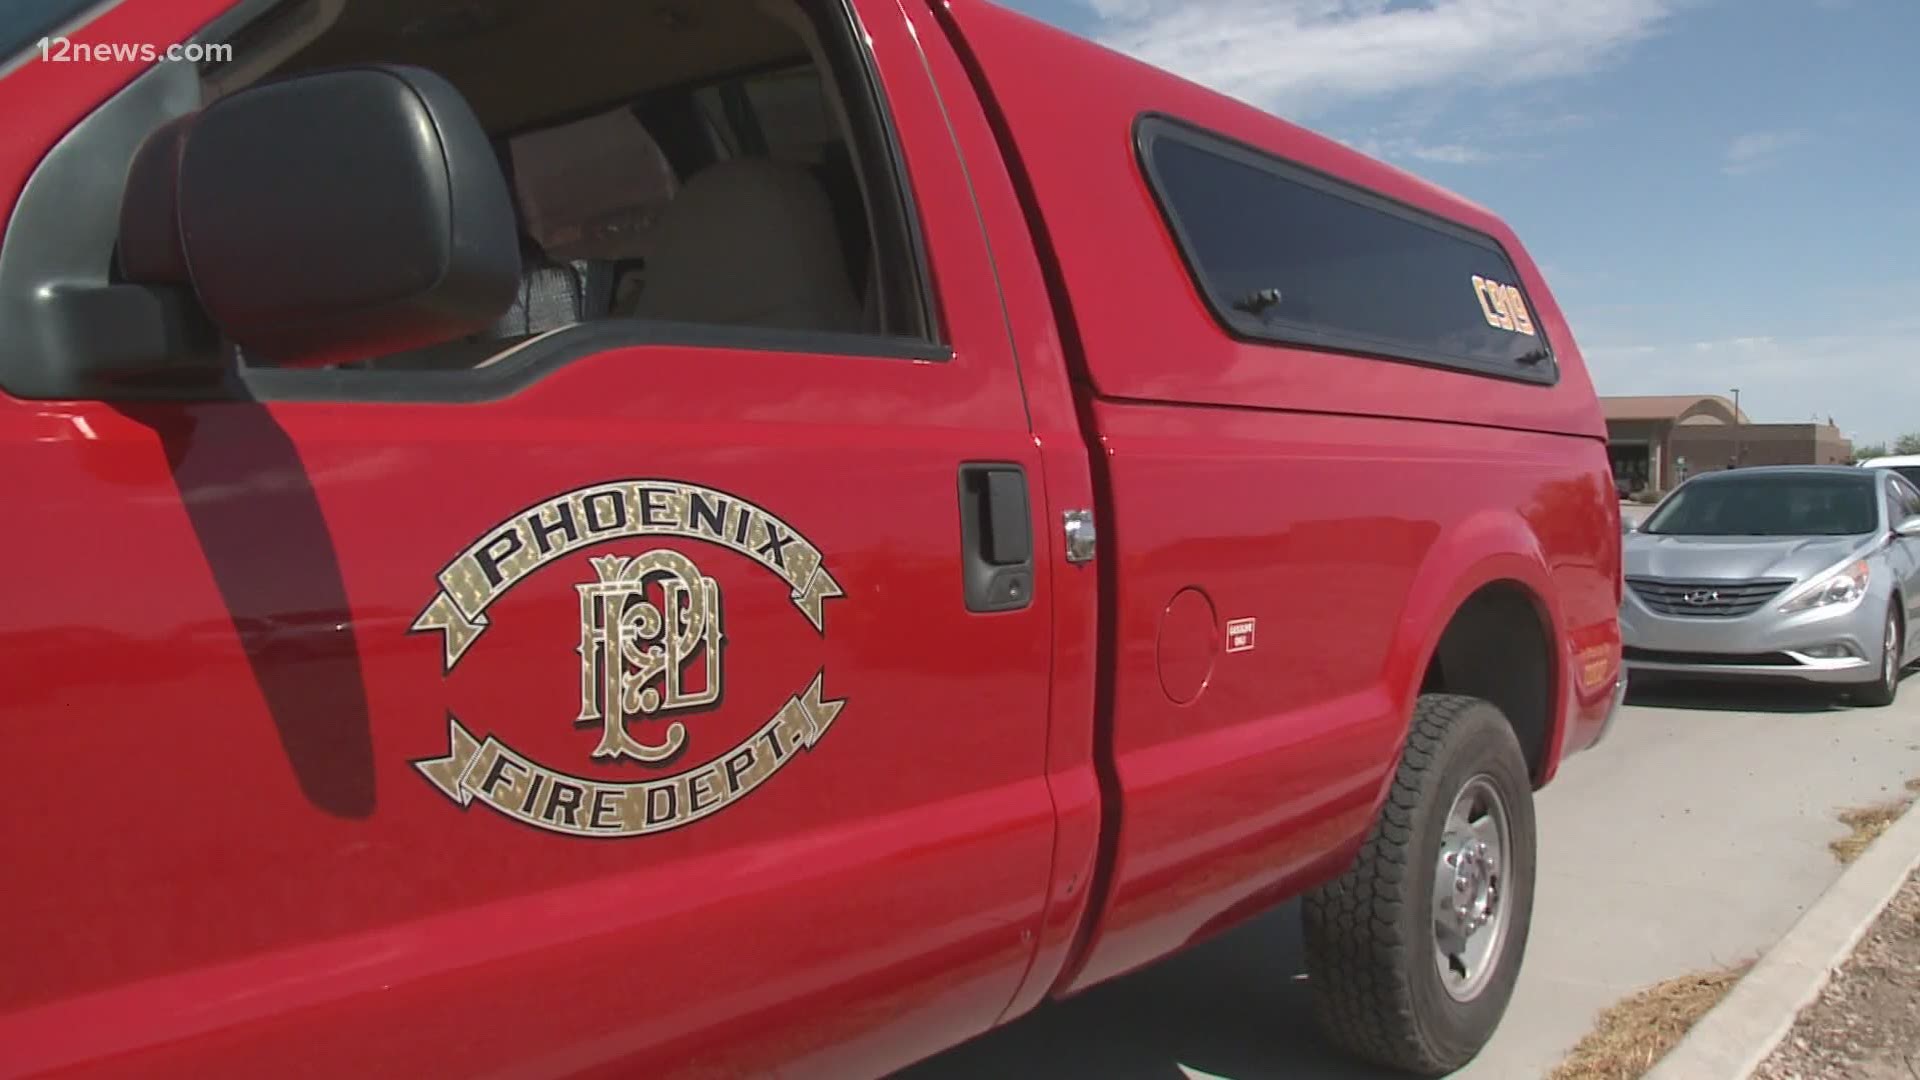 Car 919 is the fourth of its kind in the Valley. 
Its focus is to fight brush fires, and its name honors the Yarnell firefighters lost their lives.